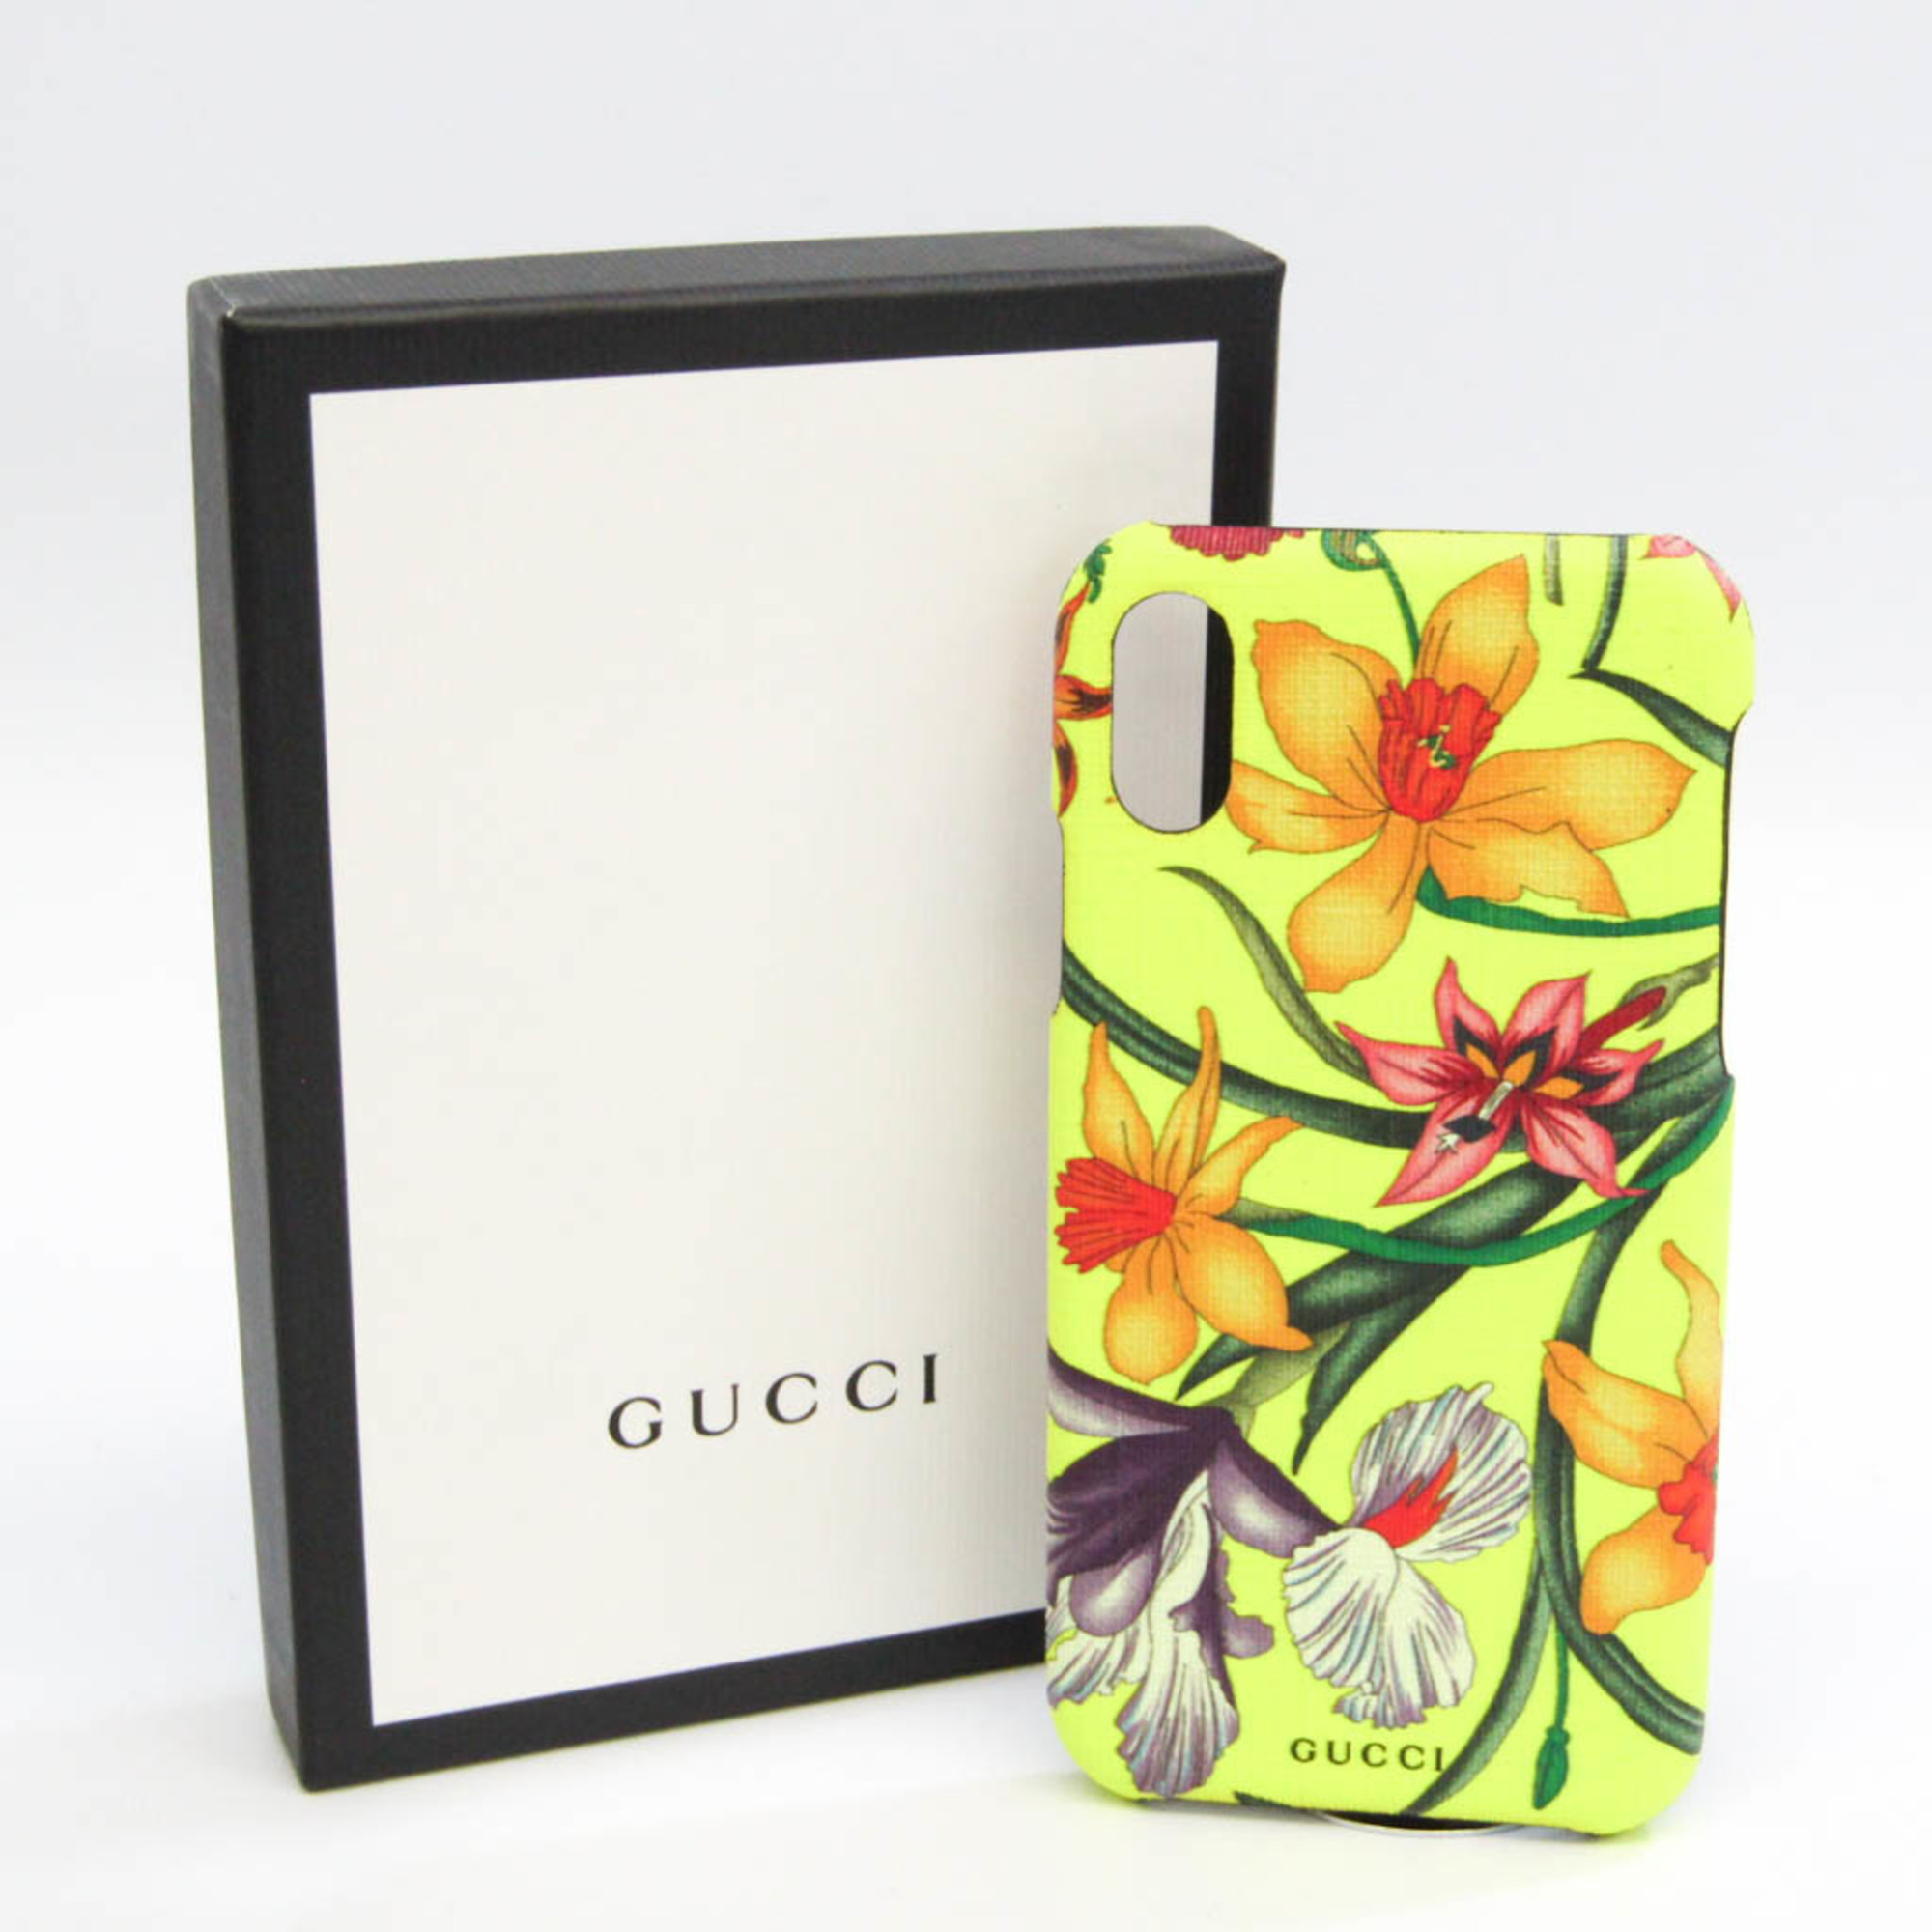 Gucci PVC Phone Bumper For IPhone X Multi-color,Yellow Flower pattern 550800